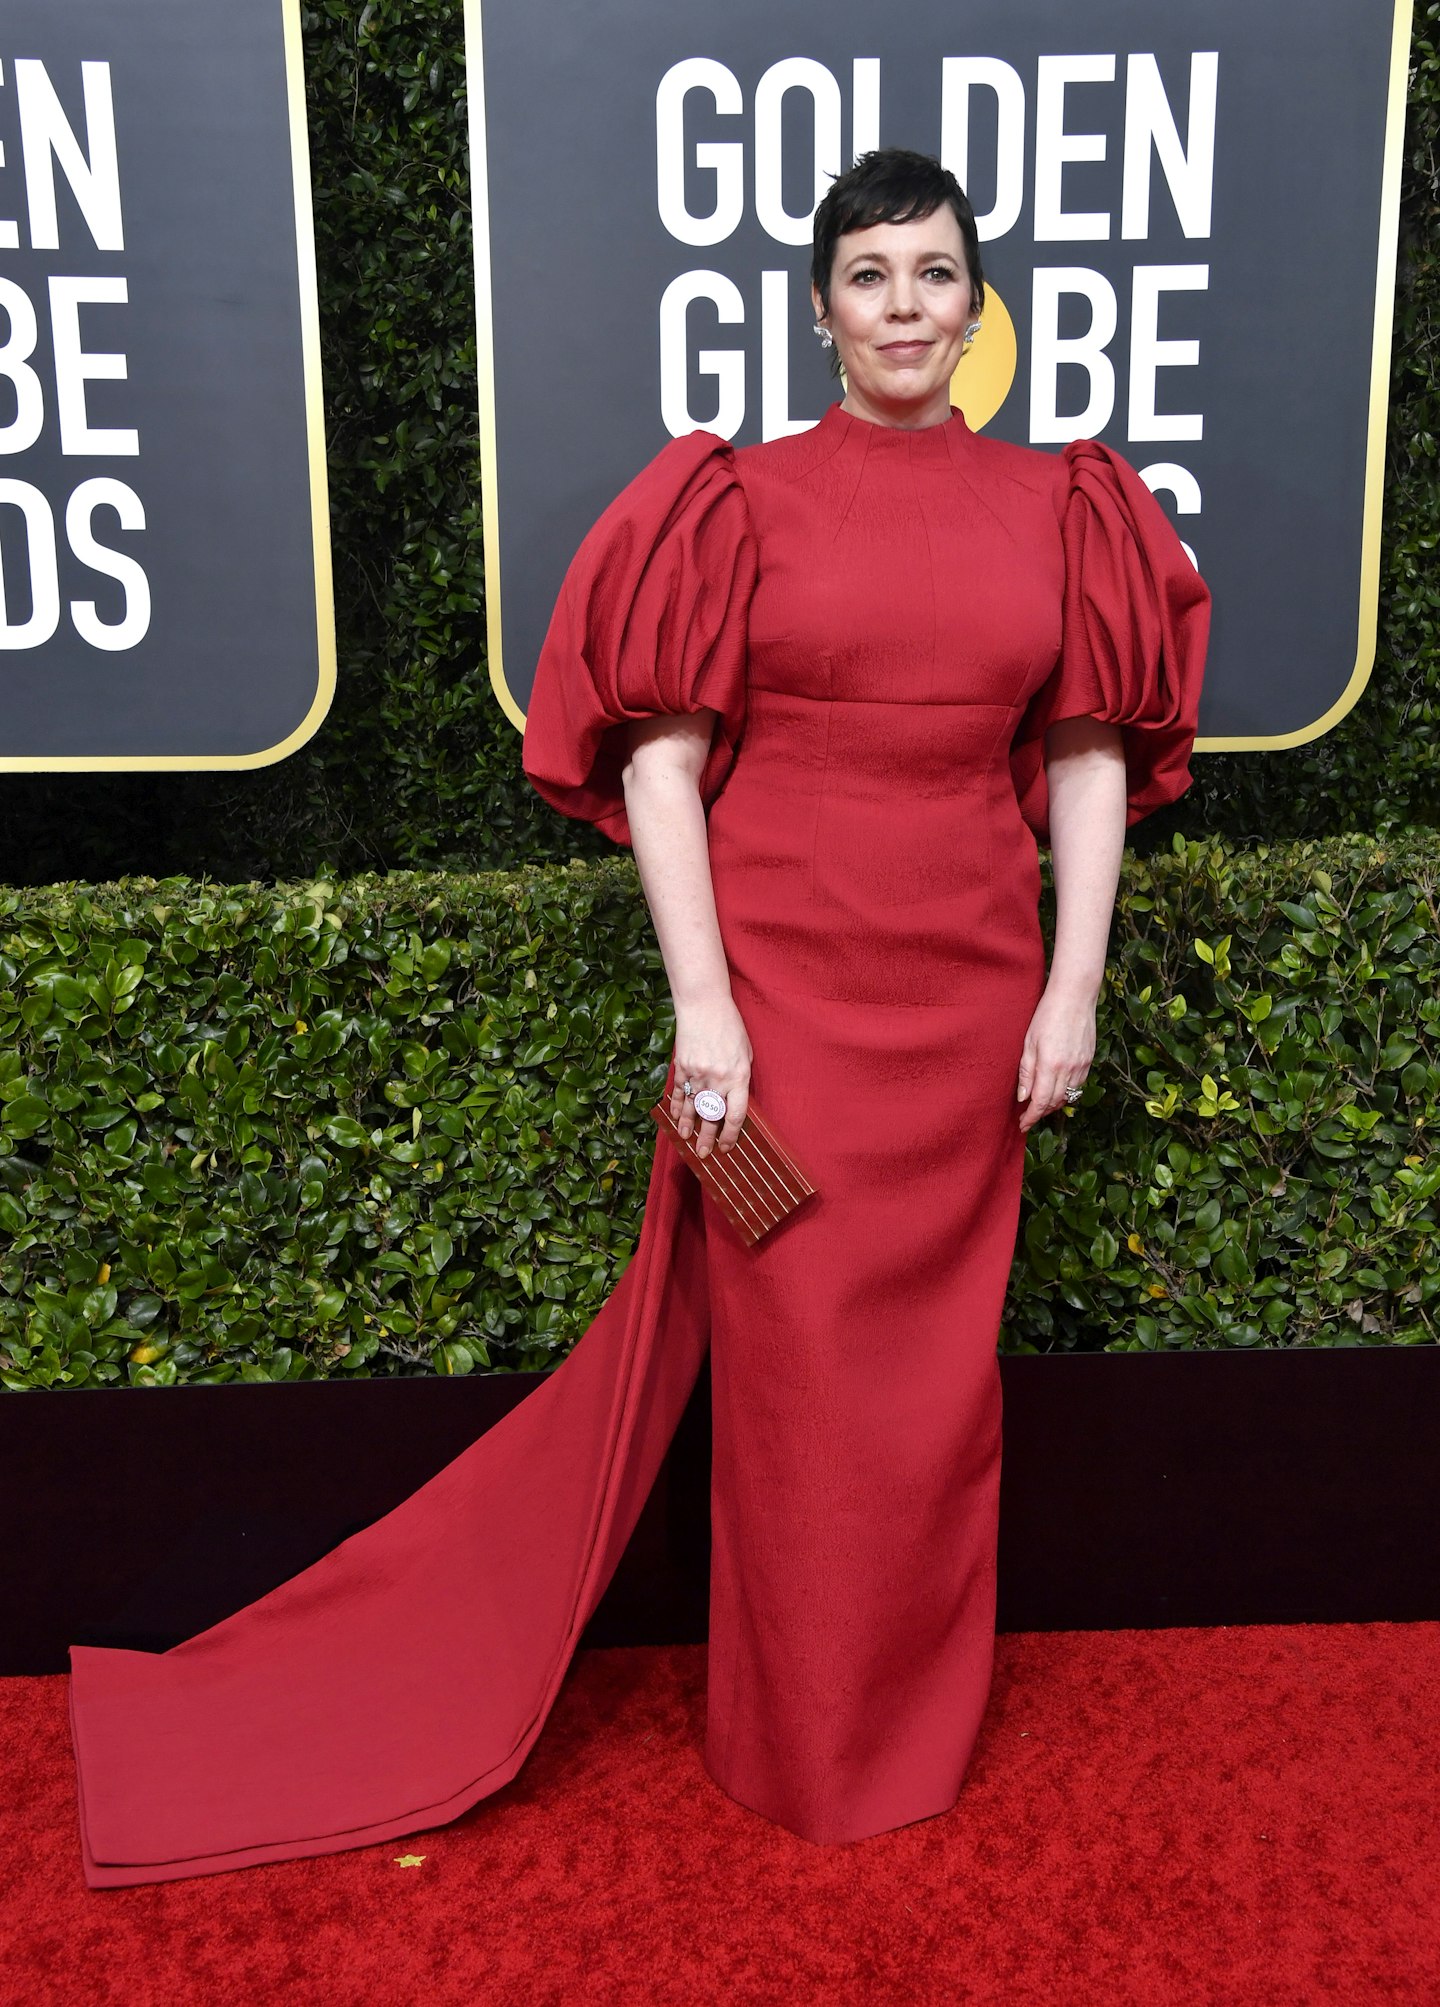 Olivia Colman wearing a red Emilia Wickstead gown with exaggerated puff sleeves